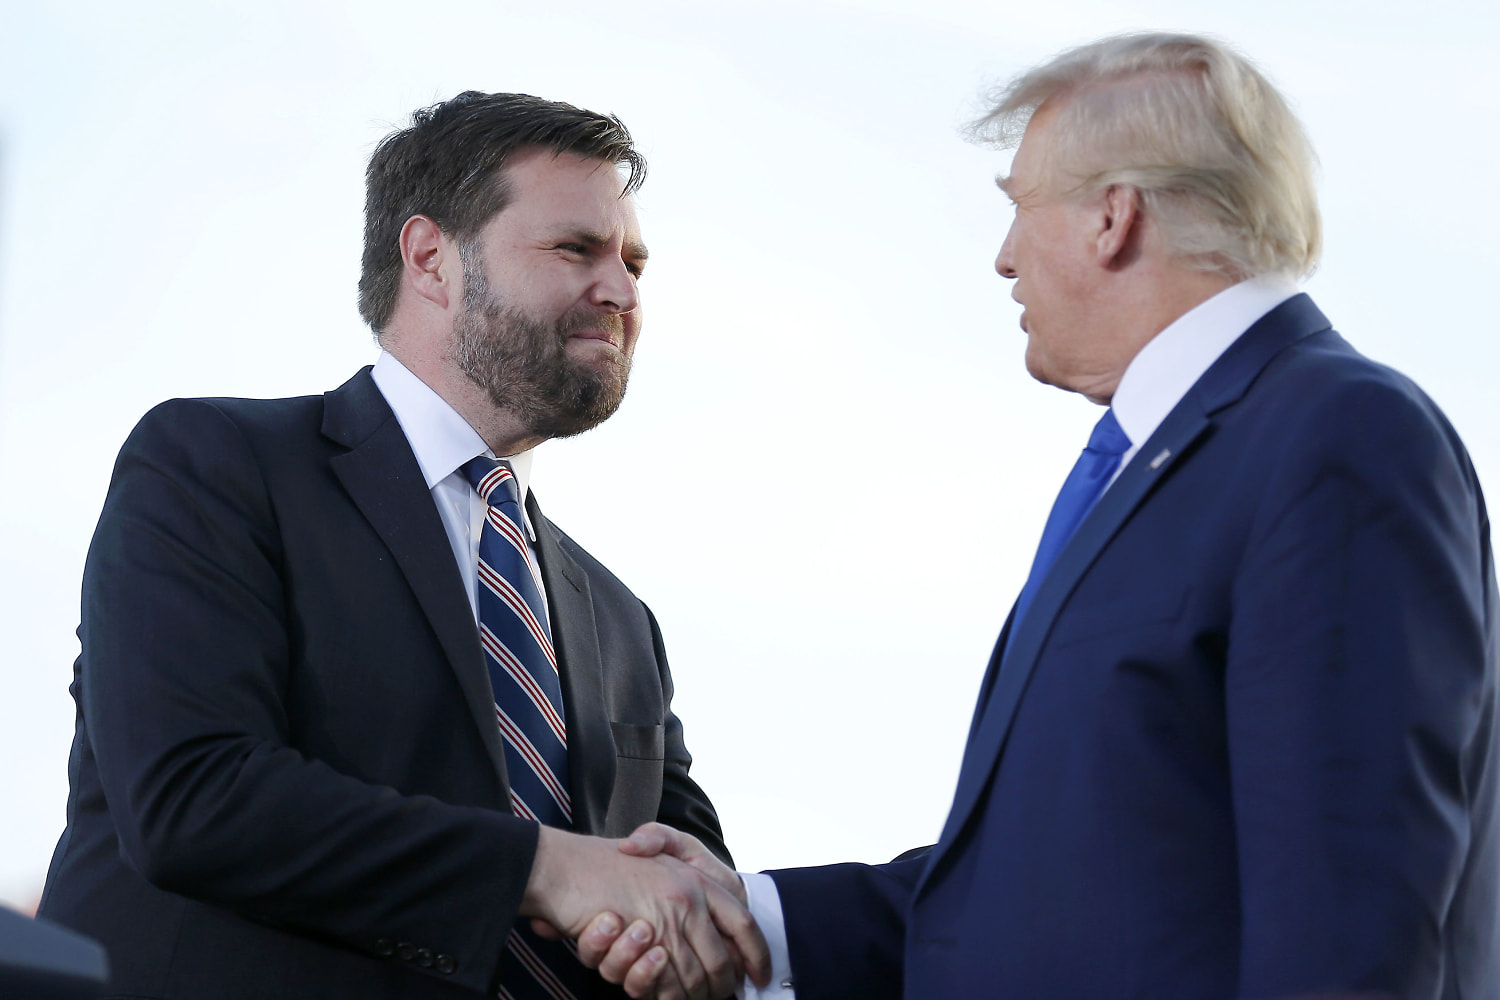 The inside story of how Trump chose JD Vance as his running mate 